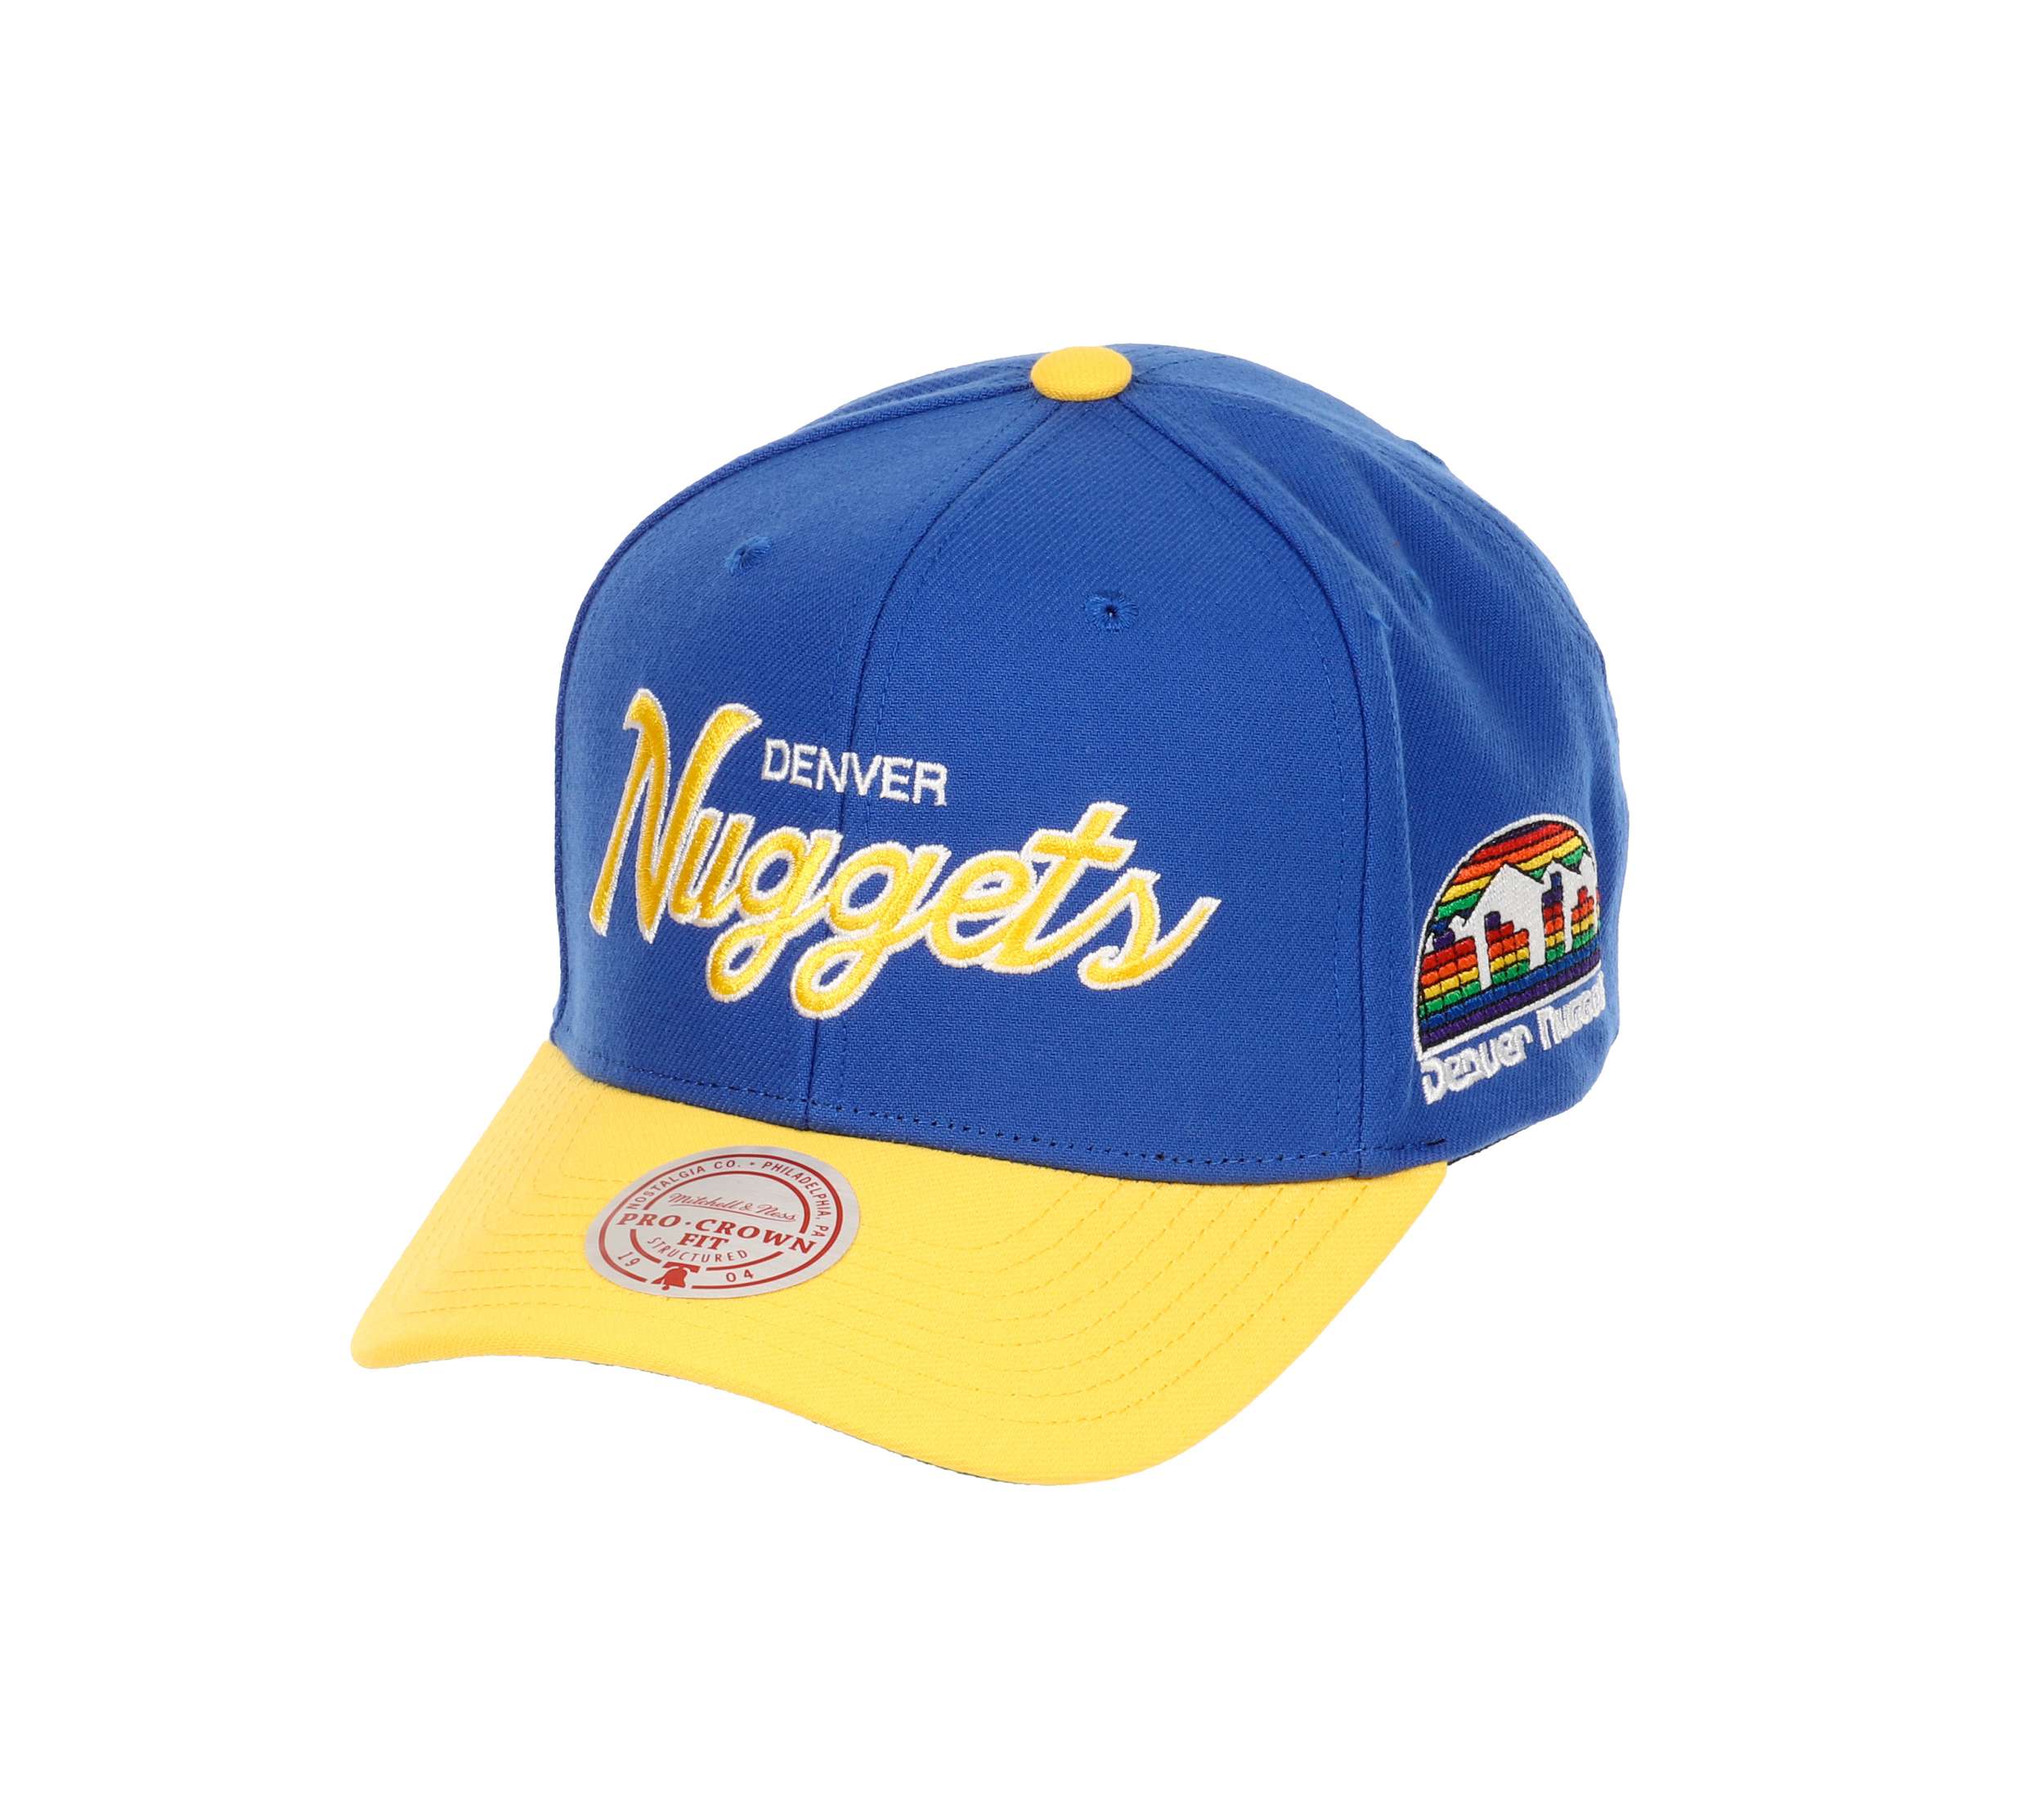 Denver Nuggets NBA Team Script 2.0 Blue Yellow Adjustable Curved Snapback Cap Mitchell & Ness